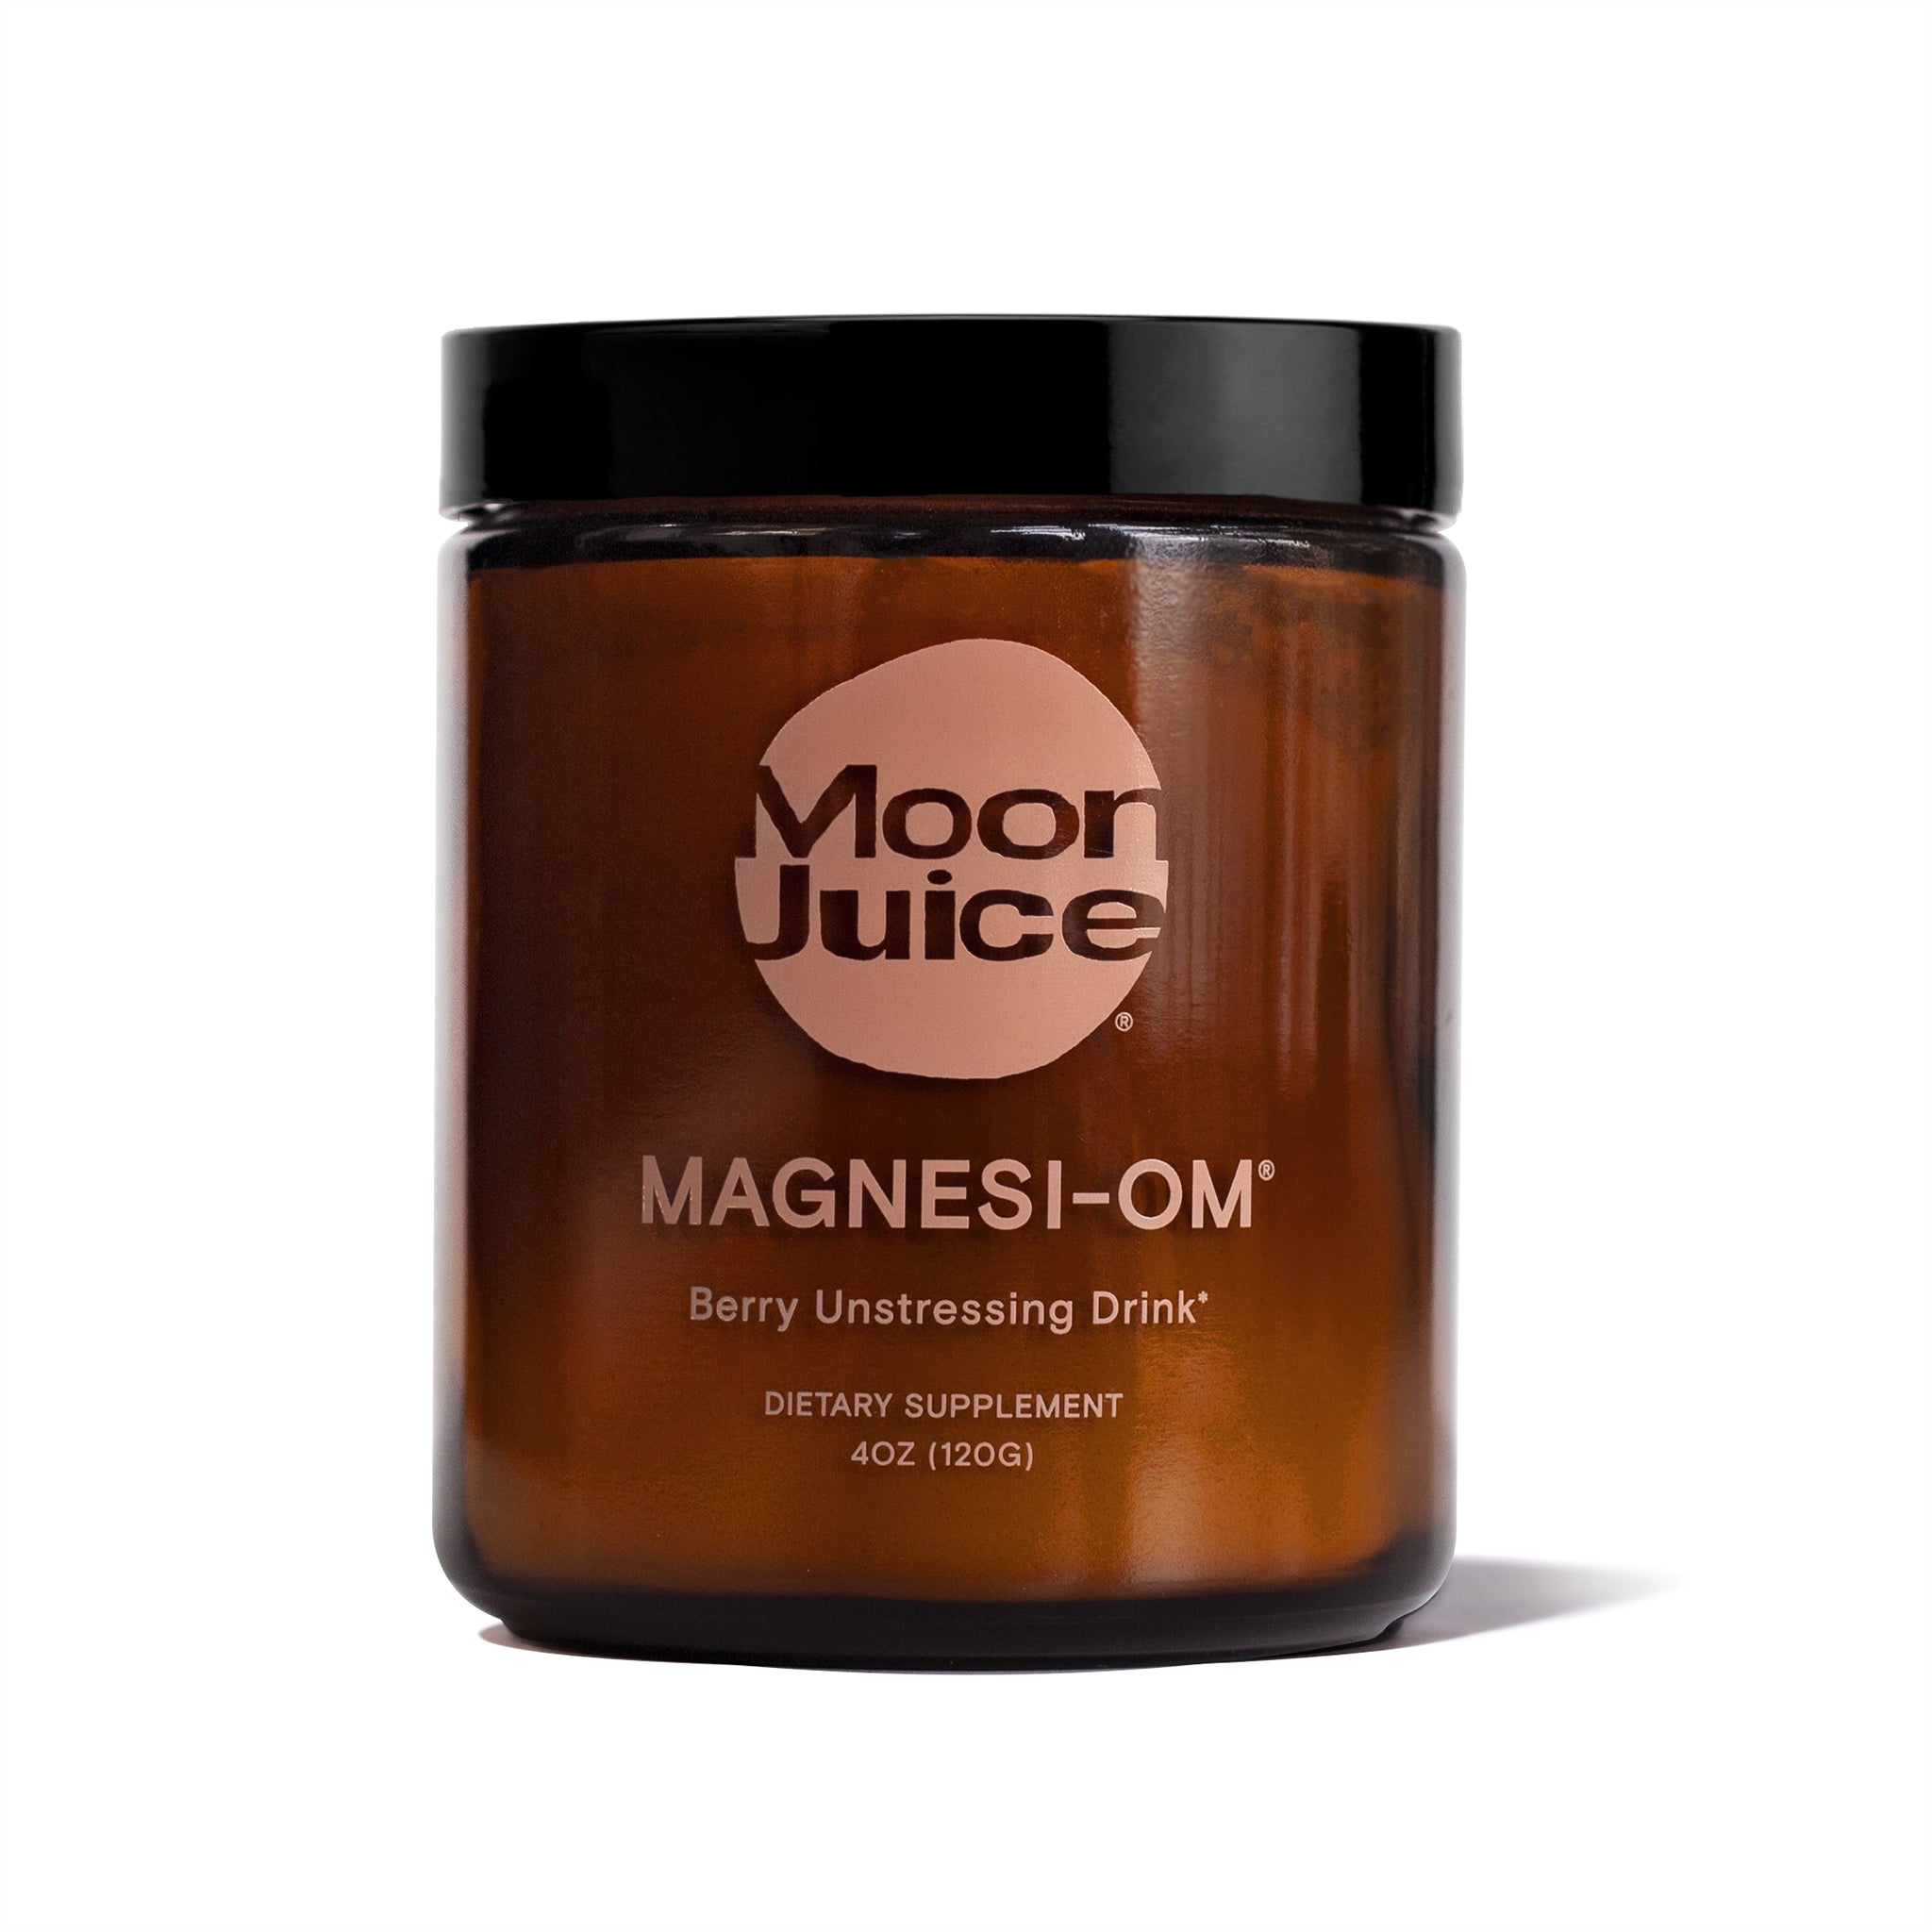 Magnesi-Om - Berry Unstressing Drink